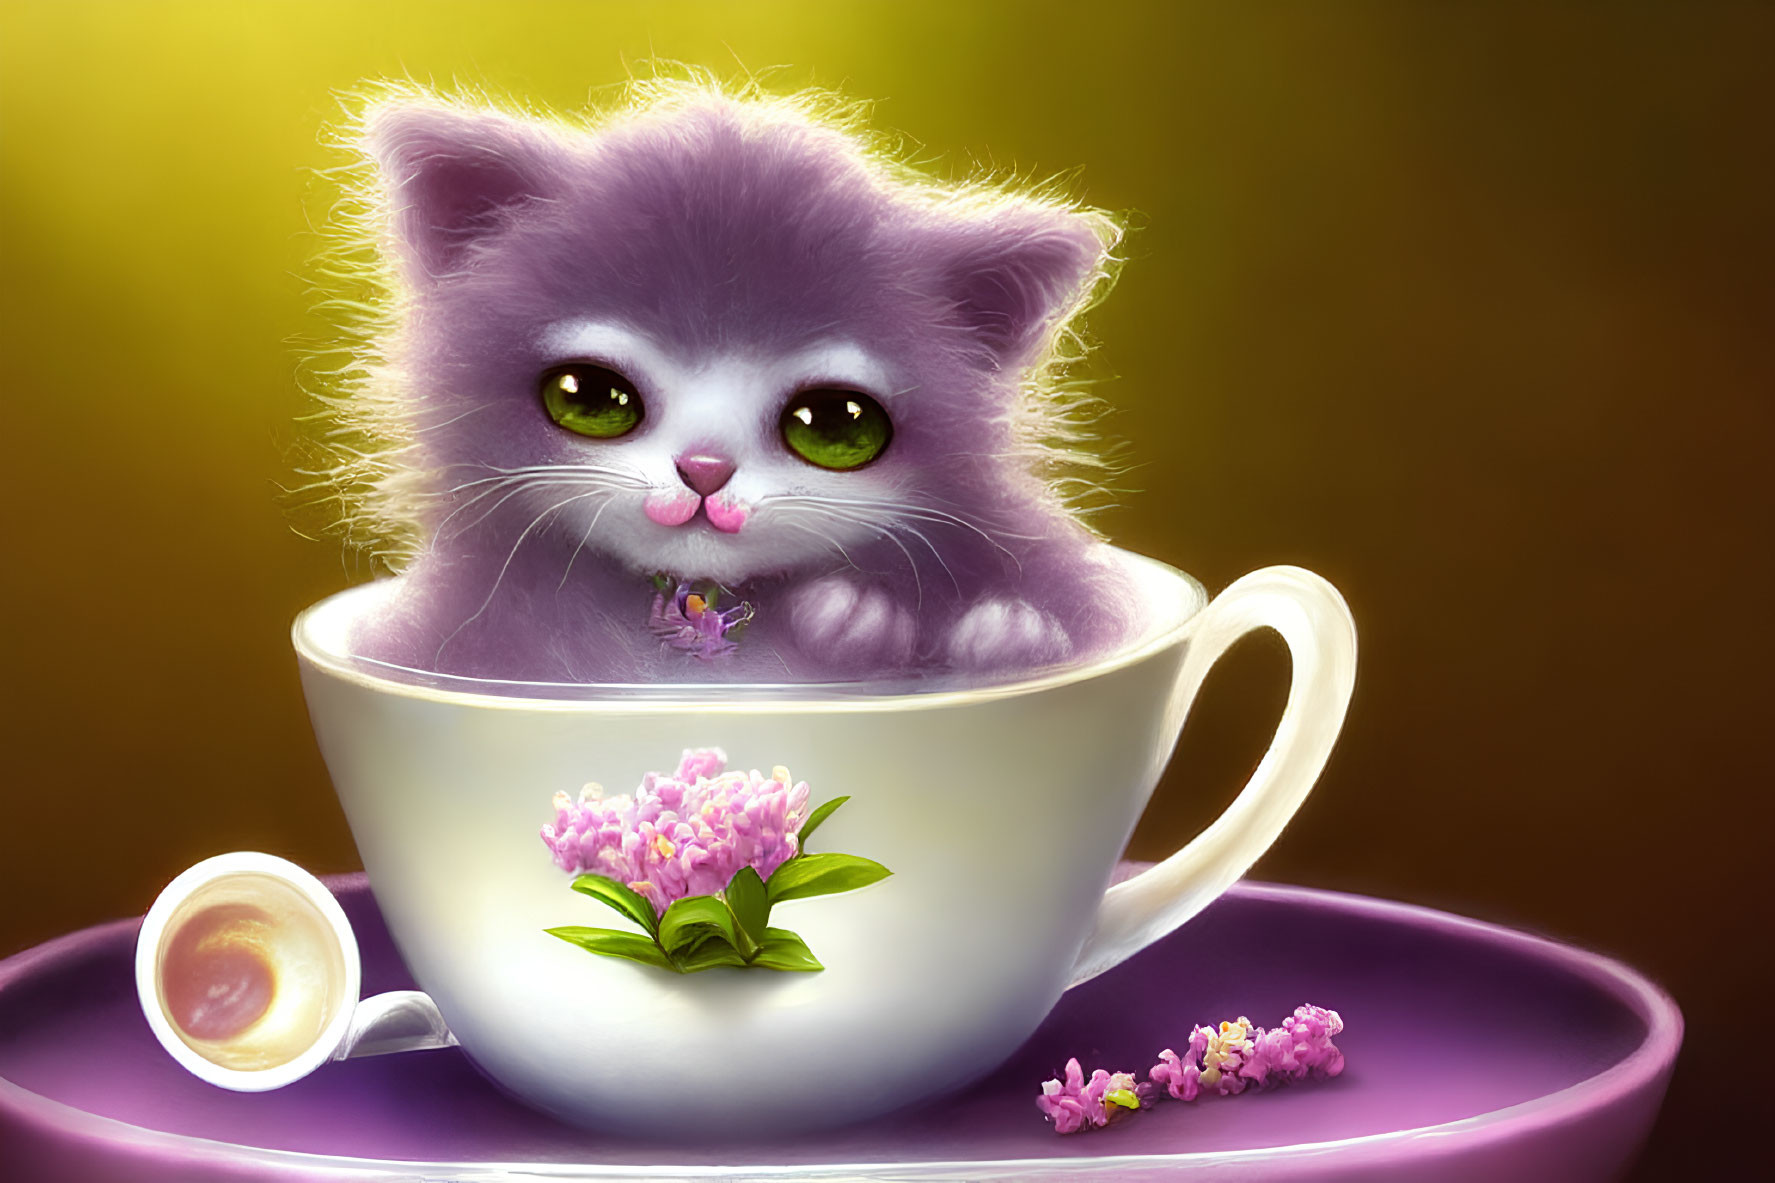 Fluffy purple kitten in oversized teacup with green eyes and flower